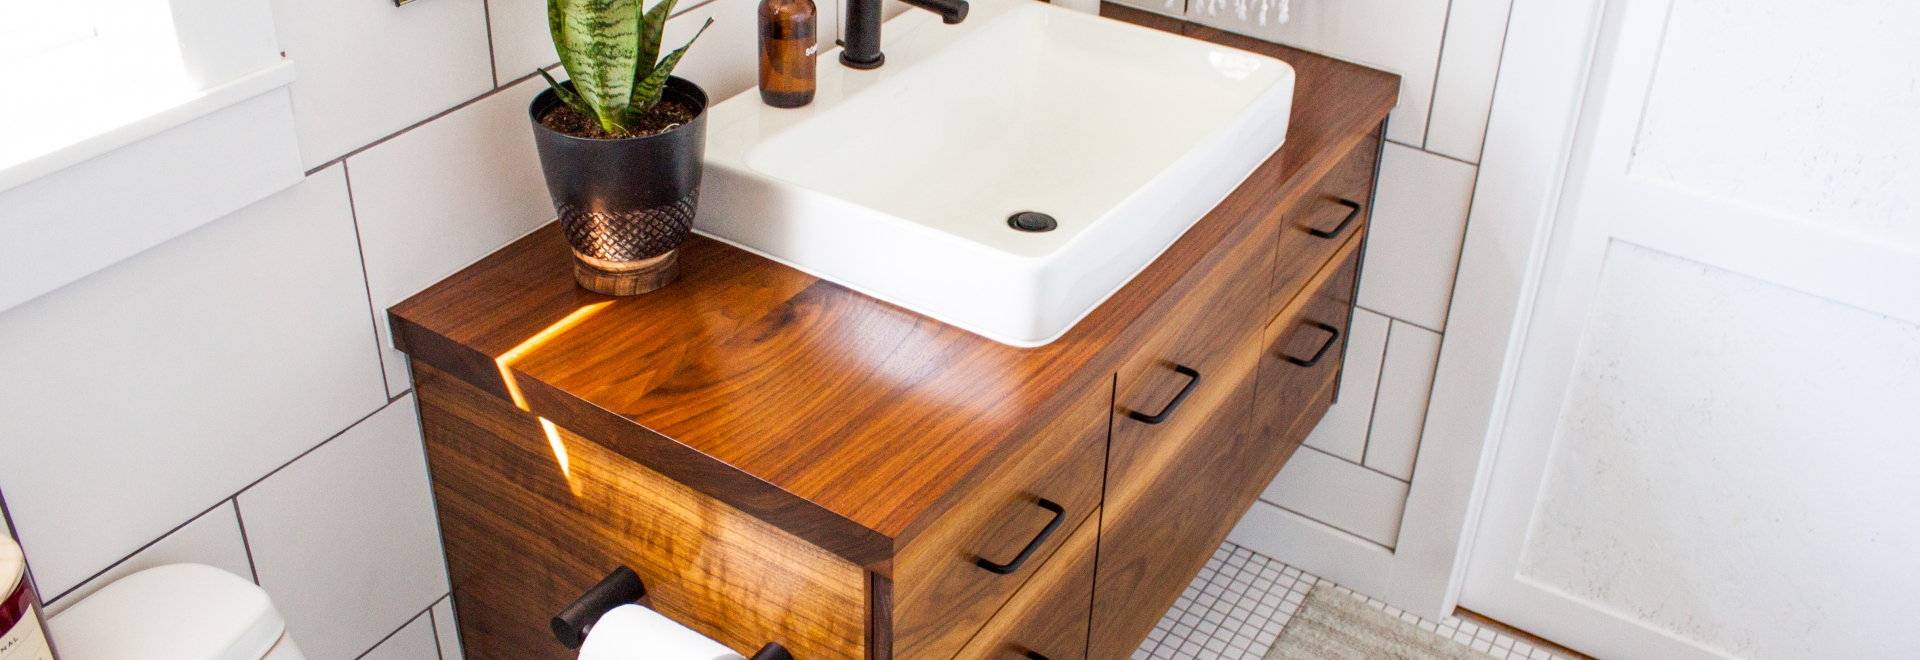 dark wooden bathroom vanity with white sink atop and snake plant to the left